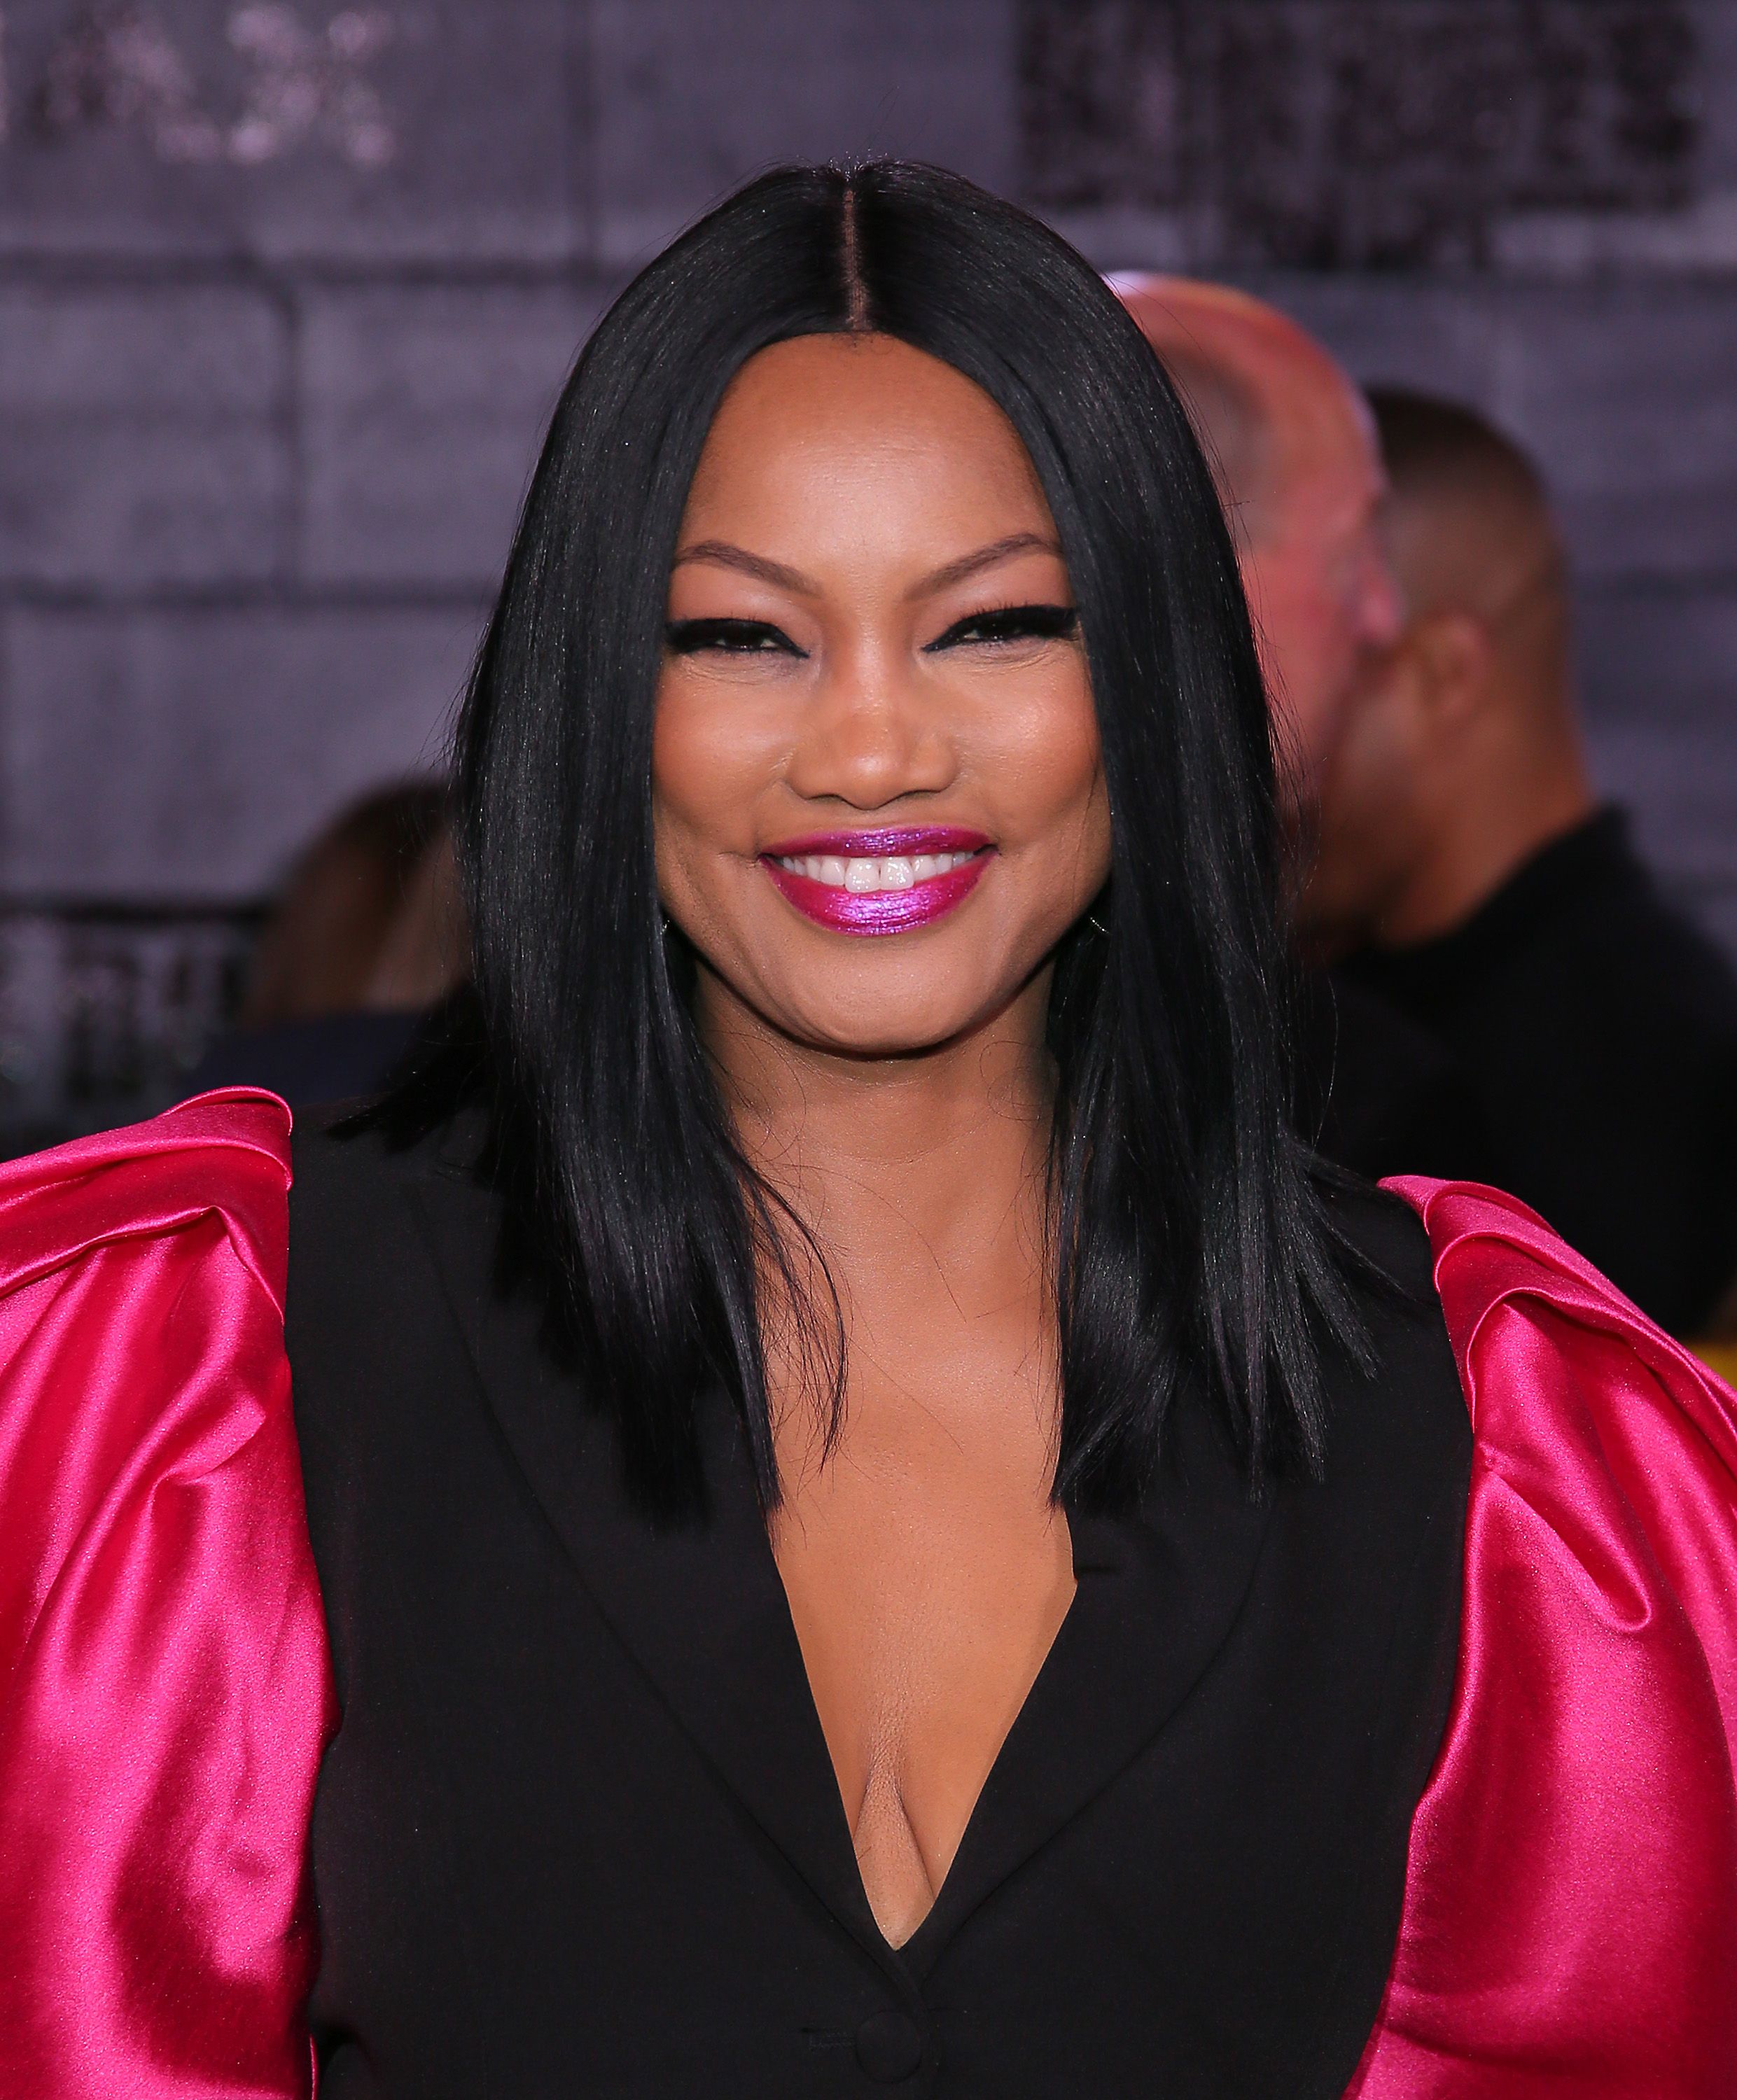 Garcelle Beauvais at the World Premiere of "Bad Boys for Life" at TCL Chinese Theater on January 14, 2020 | Photo: Getty Images